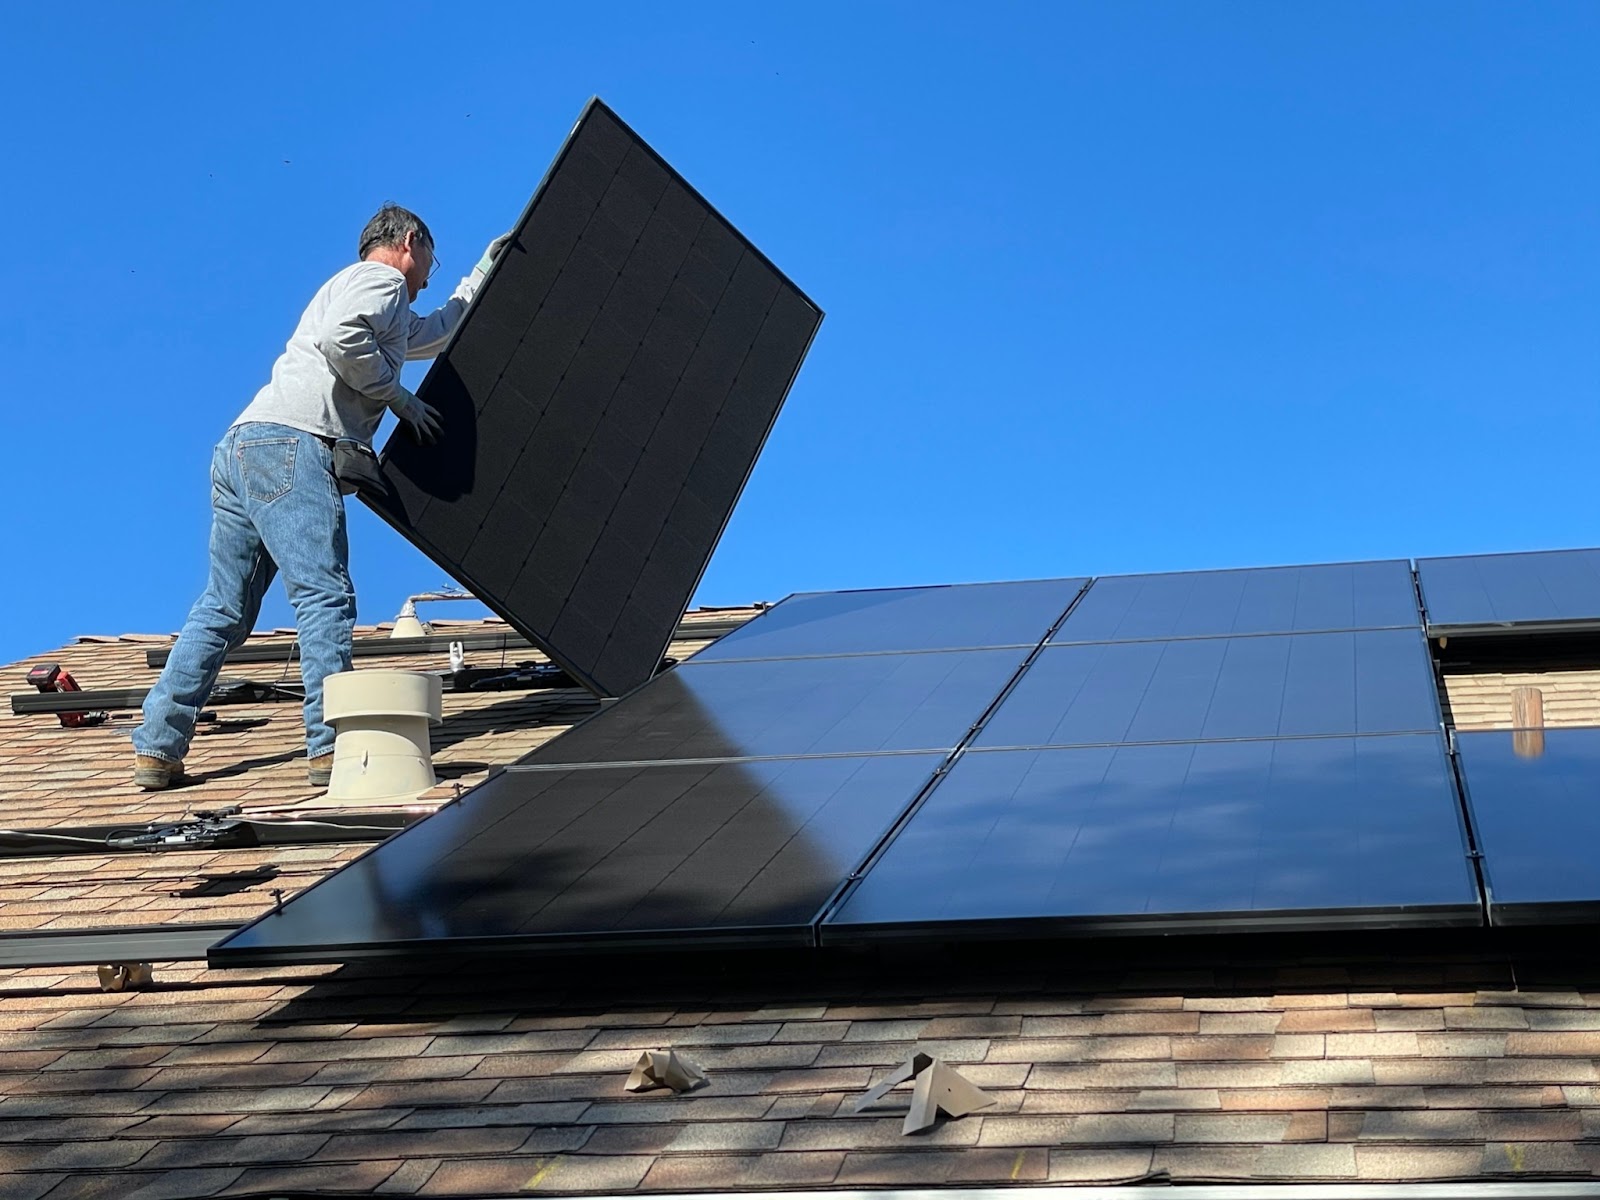 Solar panels being installed on a shingle roof